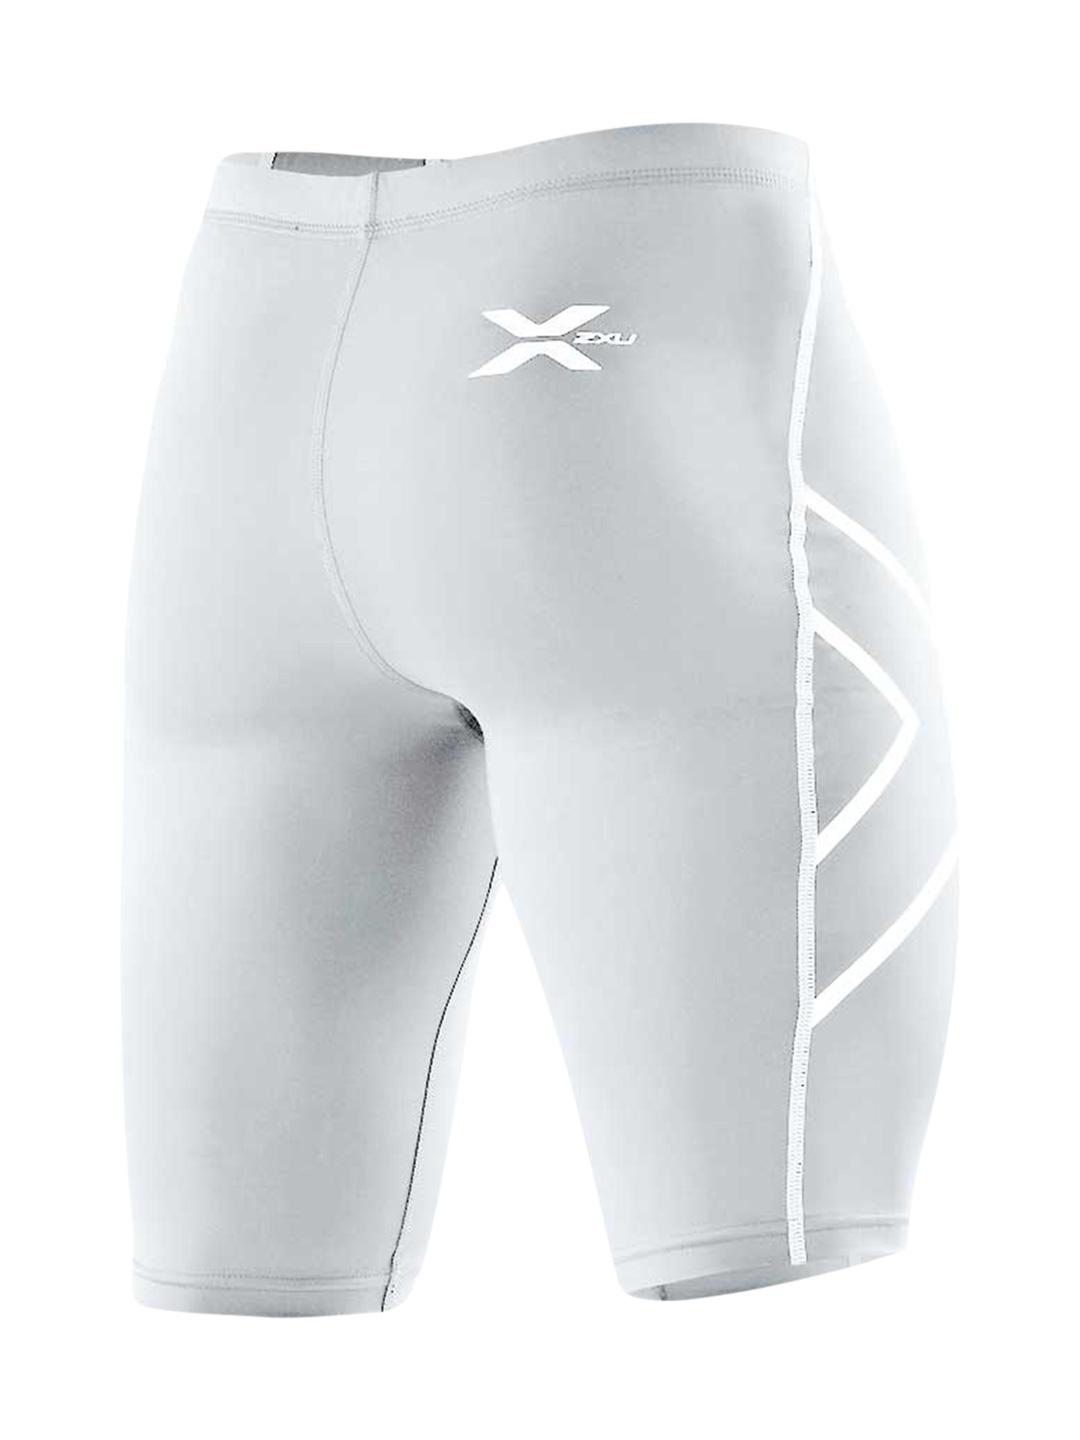 2XU Synthetic Compression Shorts in White/White (White) for Men | Lyst